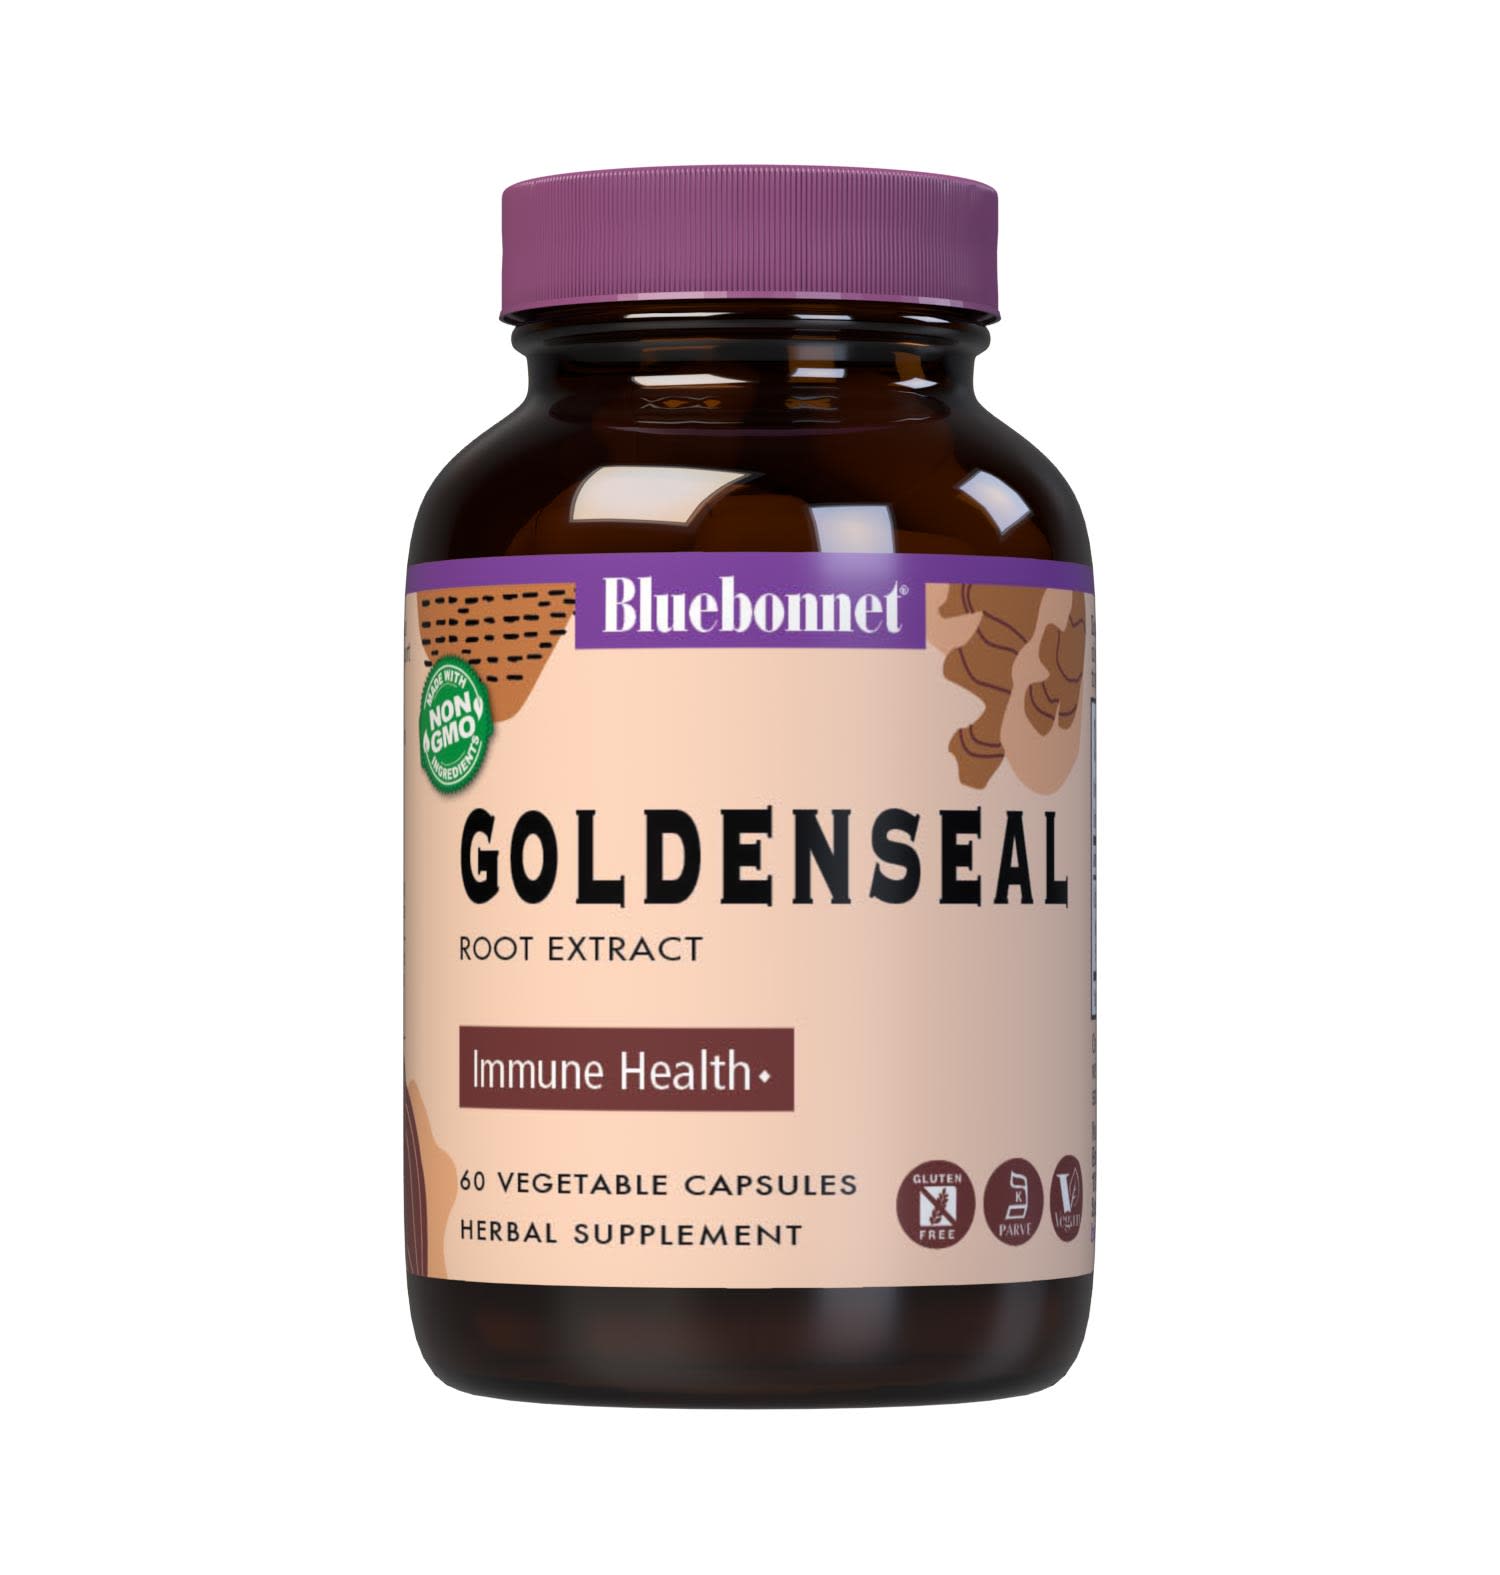 Bluebonnet’s Goldenseal Root Extract 60 Vegetable Capsules contain a standardized extract of alkaloids, the most researched active constituents found in goldenseal. A clean and gentle water-based extraction method is employed to capture and preserve goldenseal’s most valuable components. #size_60 count